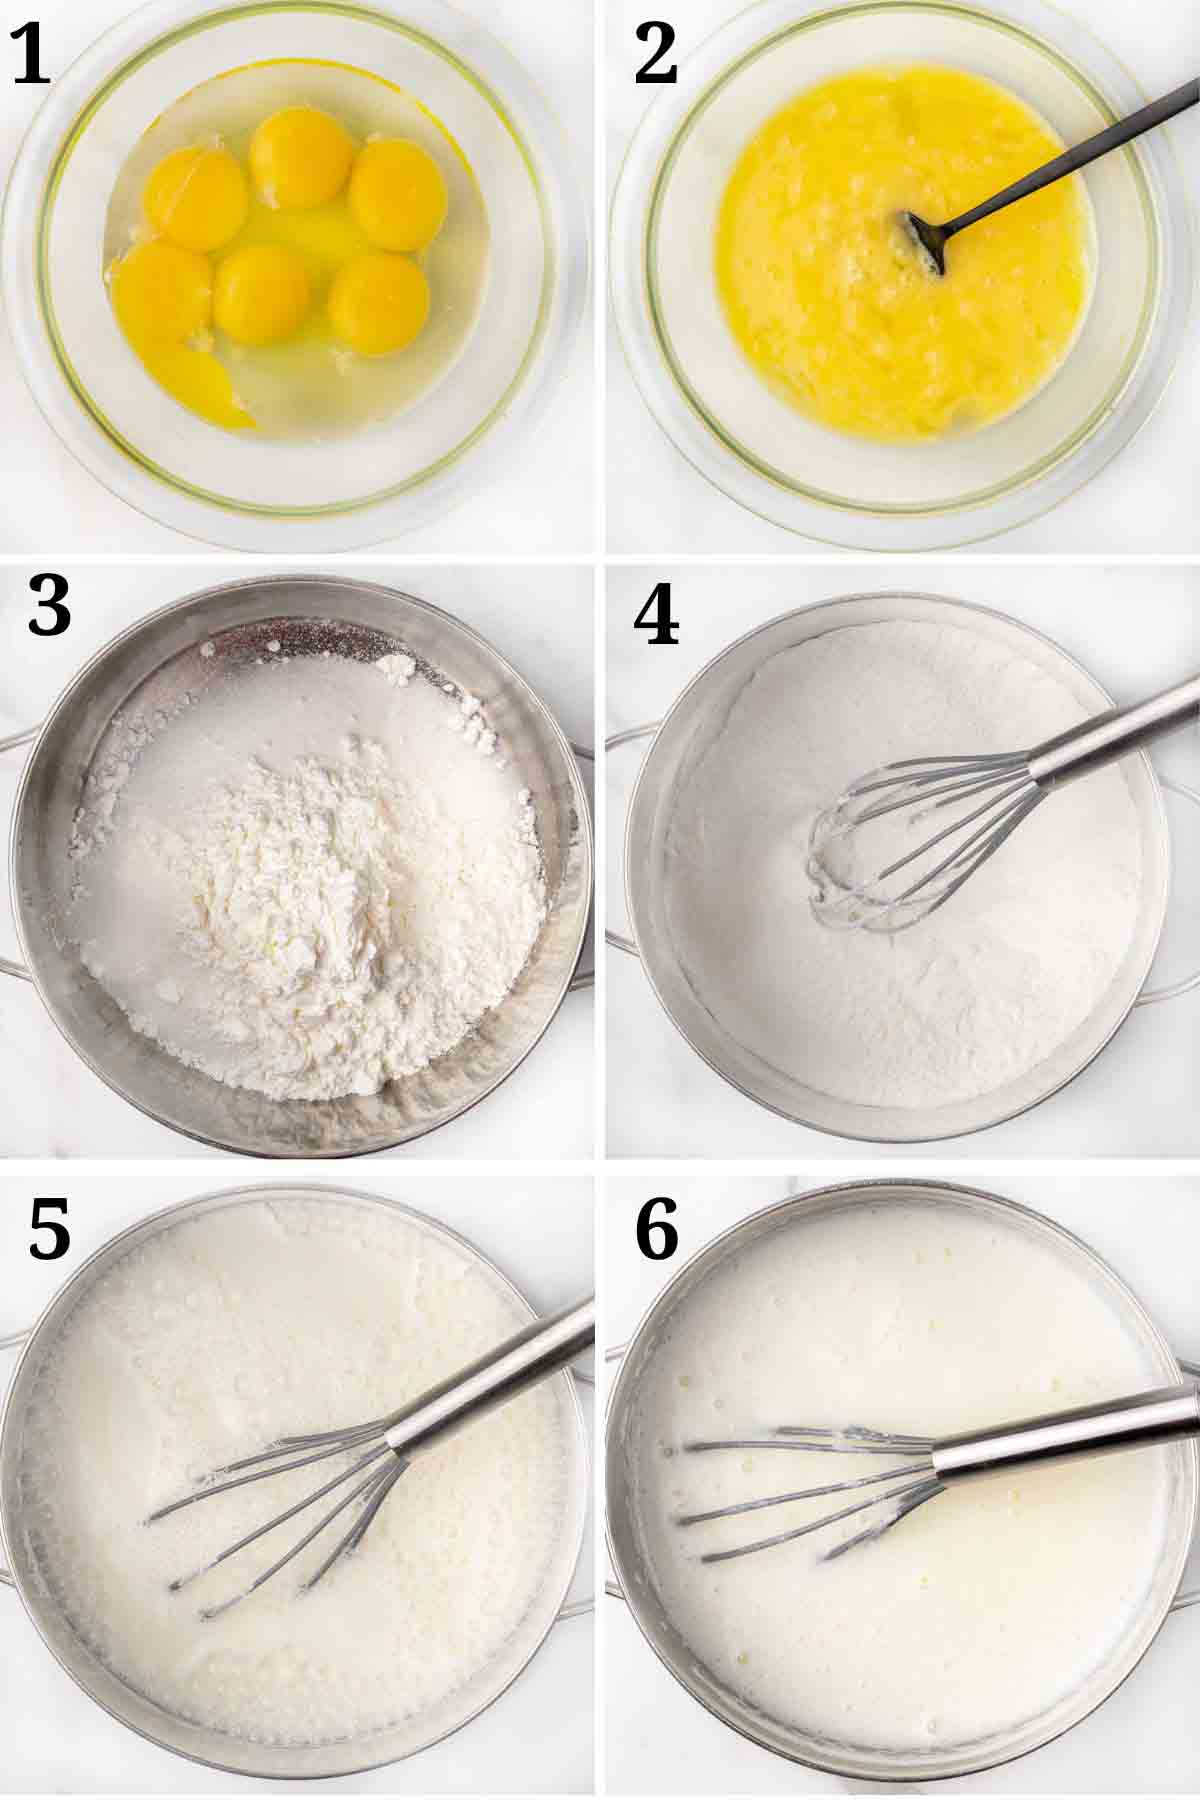 6 images showing how to make a banana cream pie filling.